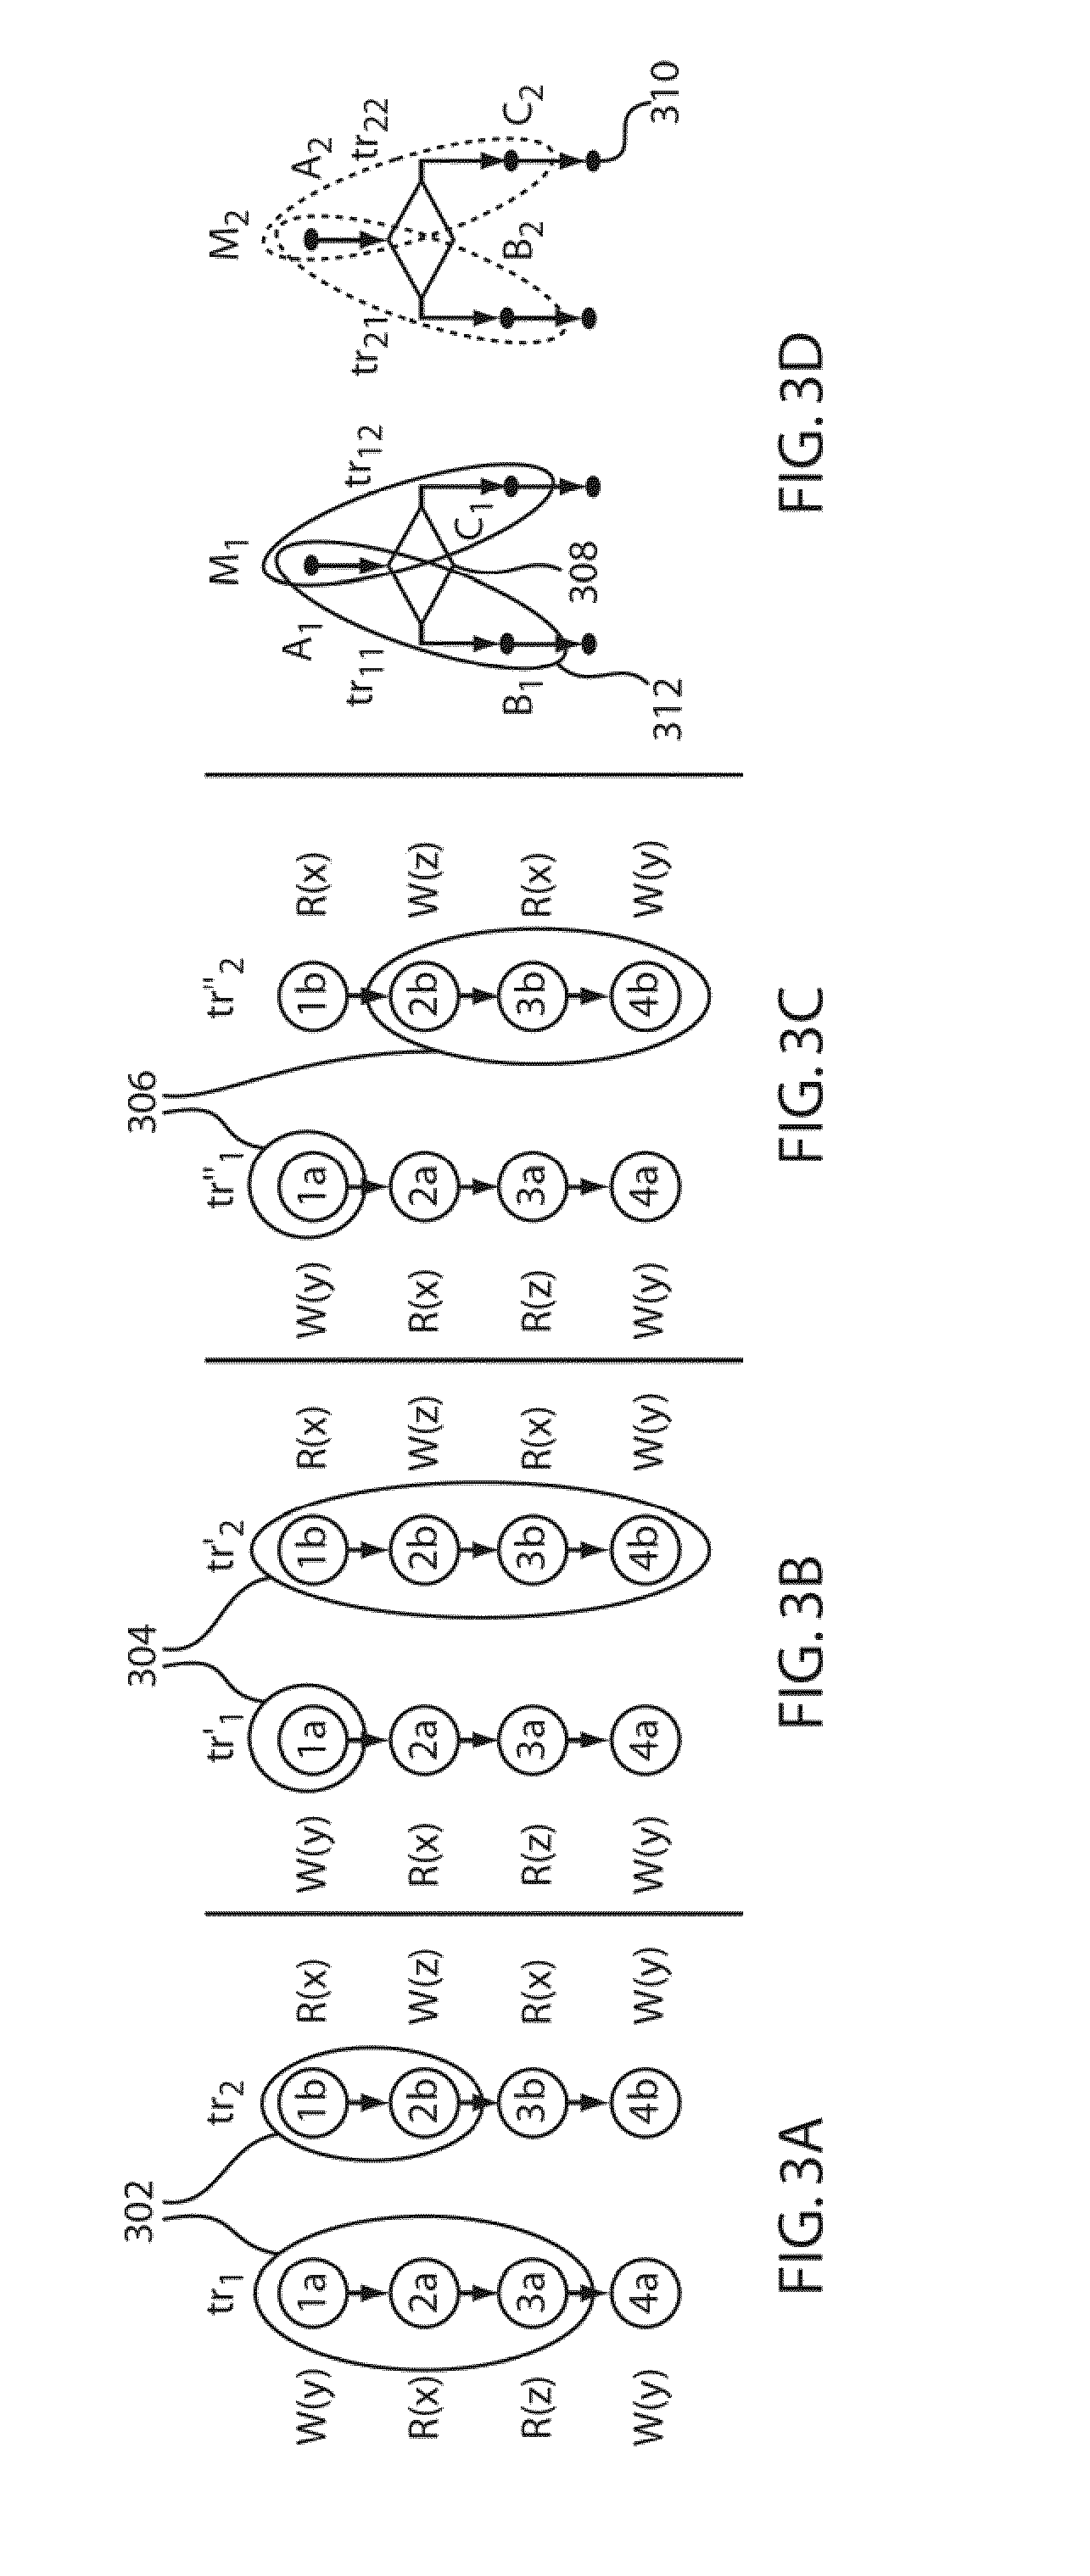 Methods and systems for reducing verification conditions for concurrent programs using mutually atomic transactions